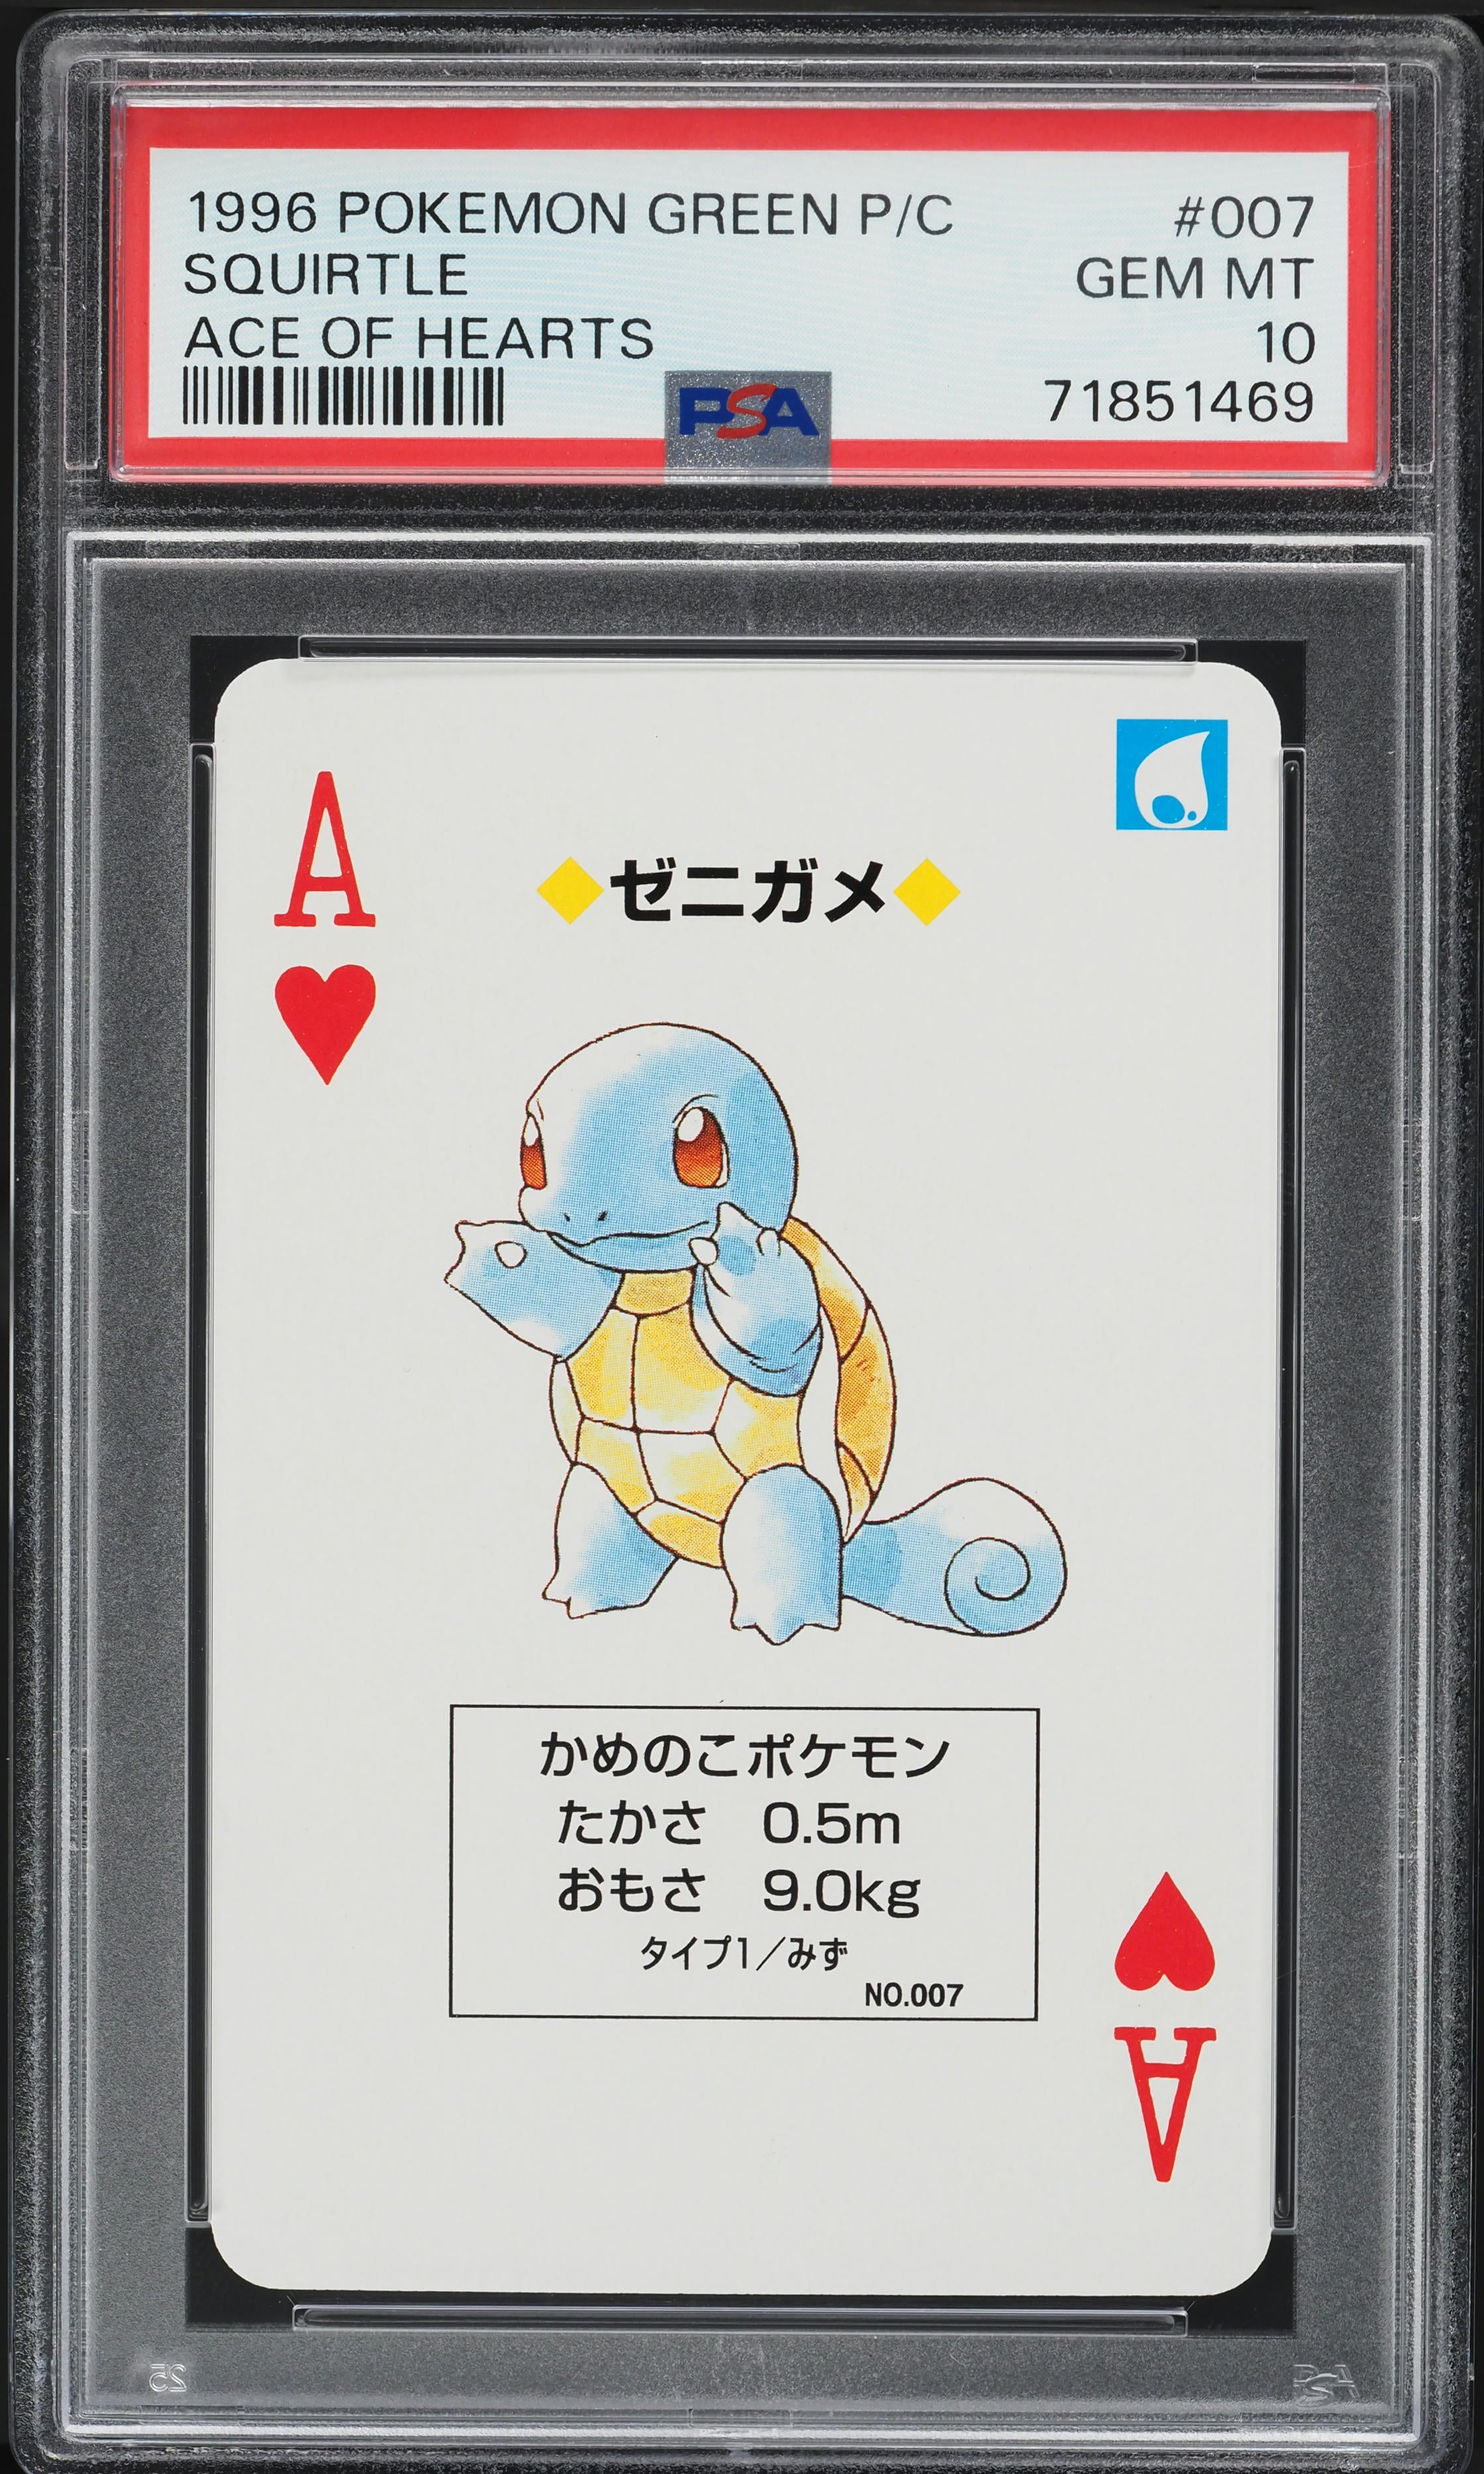 1996 Pokemon Green Version Playing Cards Ace Of Hearts Squirtle #007 PSA 10 GEM